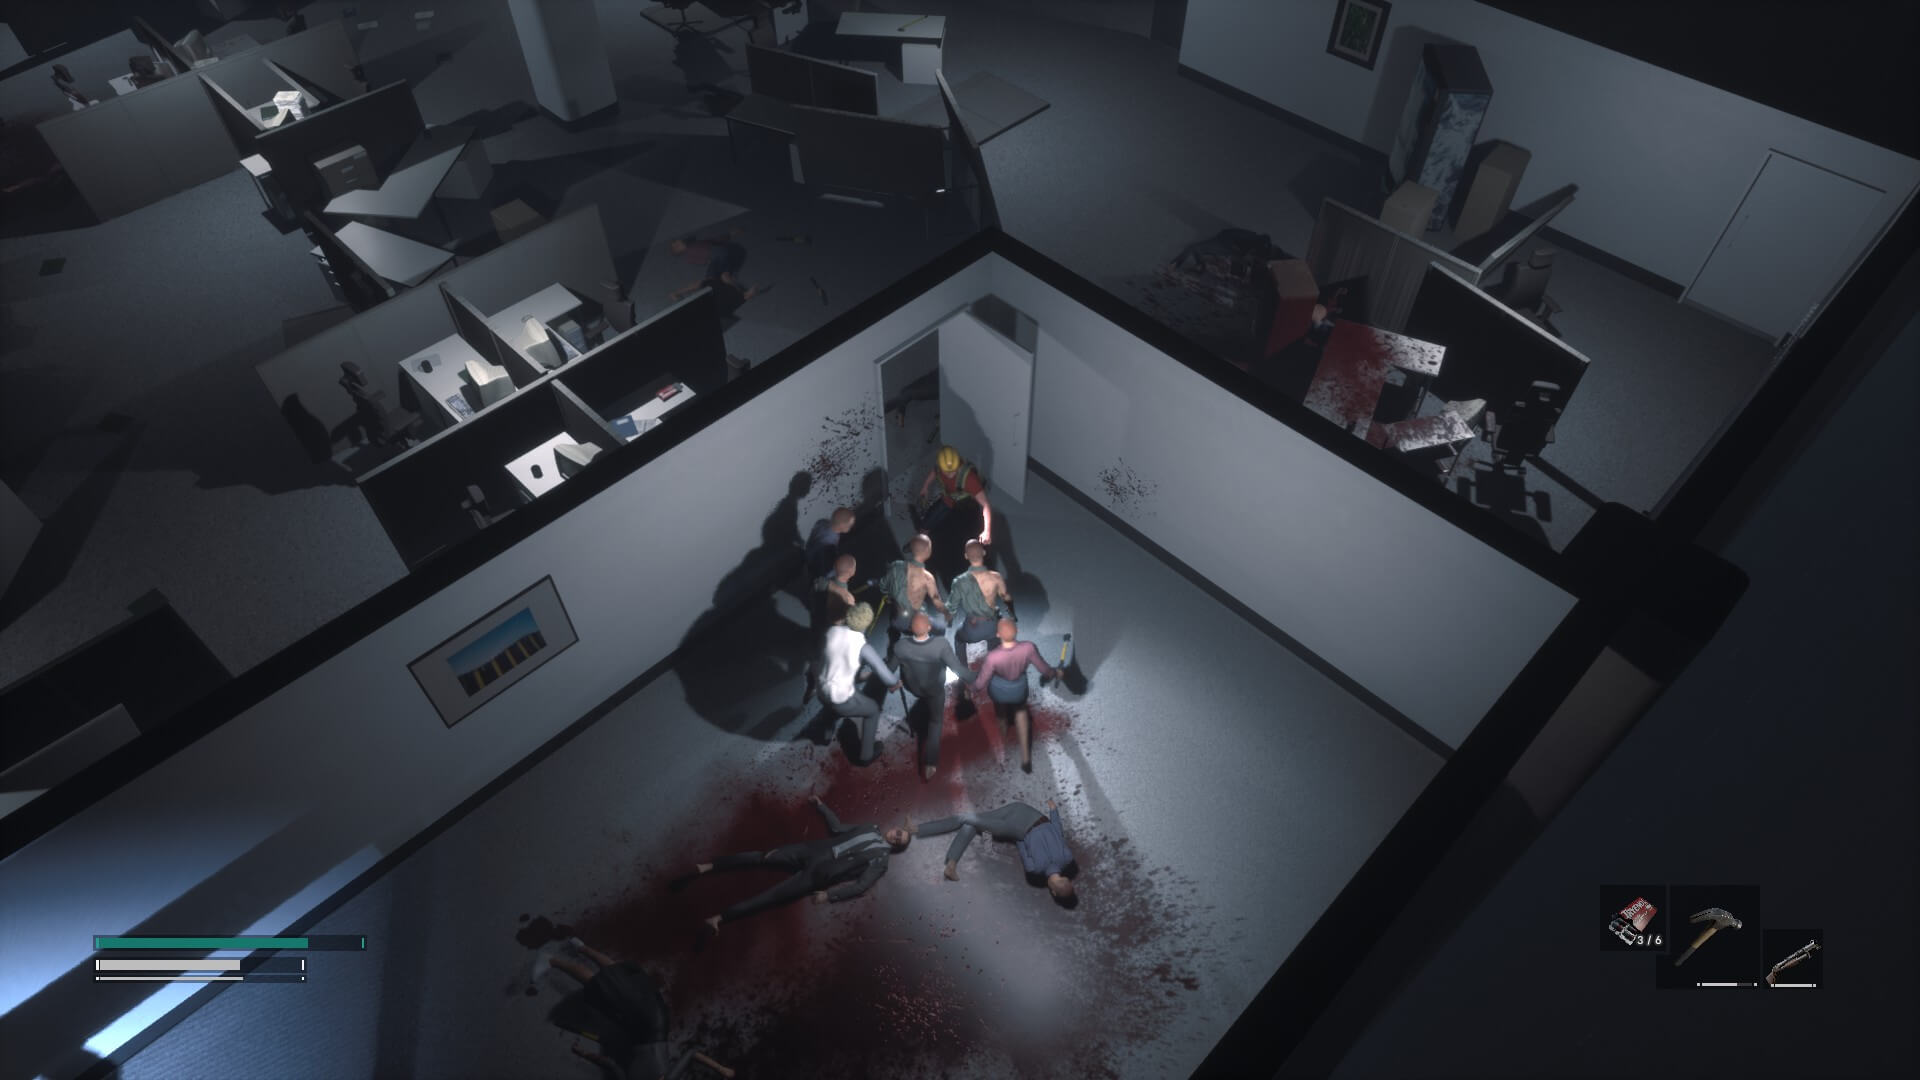 I have entered a room full of Infected. The main area is filled with desks and cubicles with some dead bodies laying around staining the floor with blood.